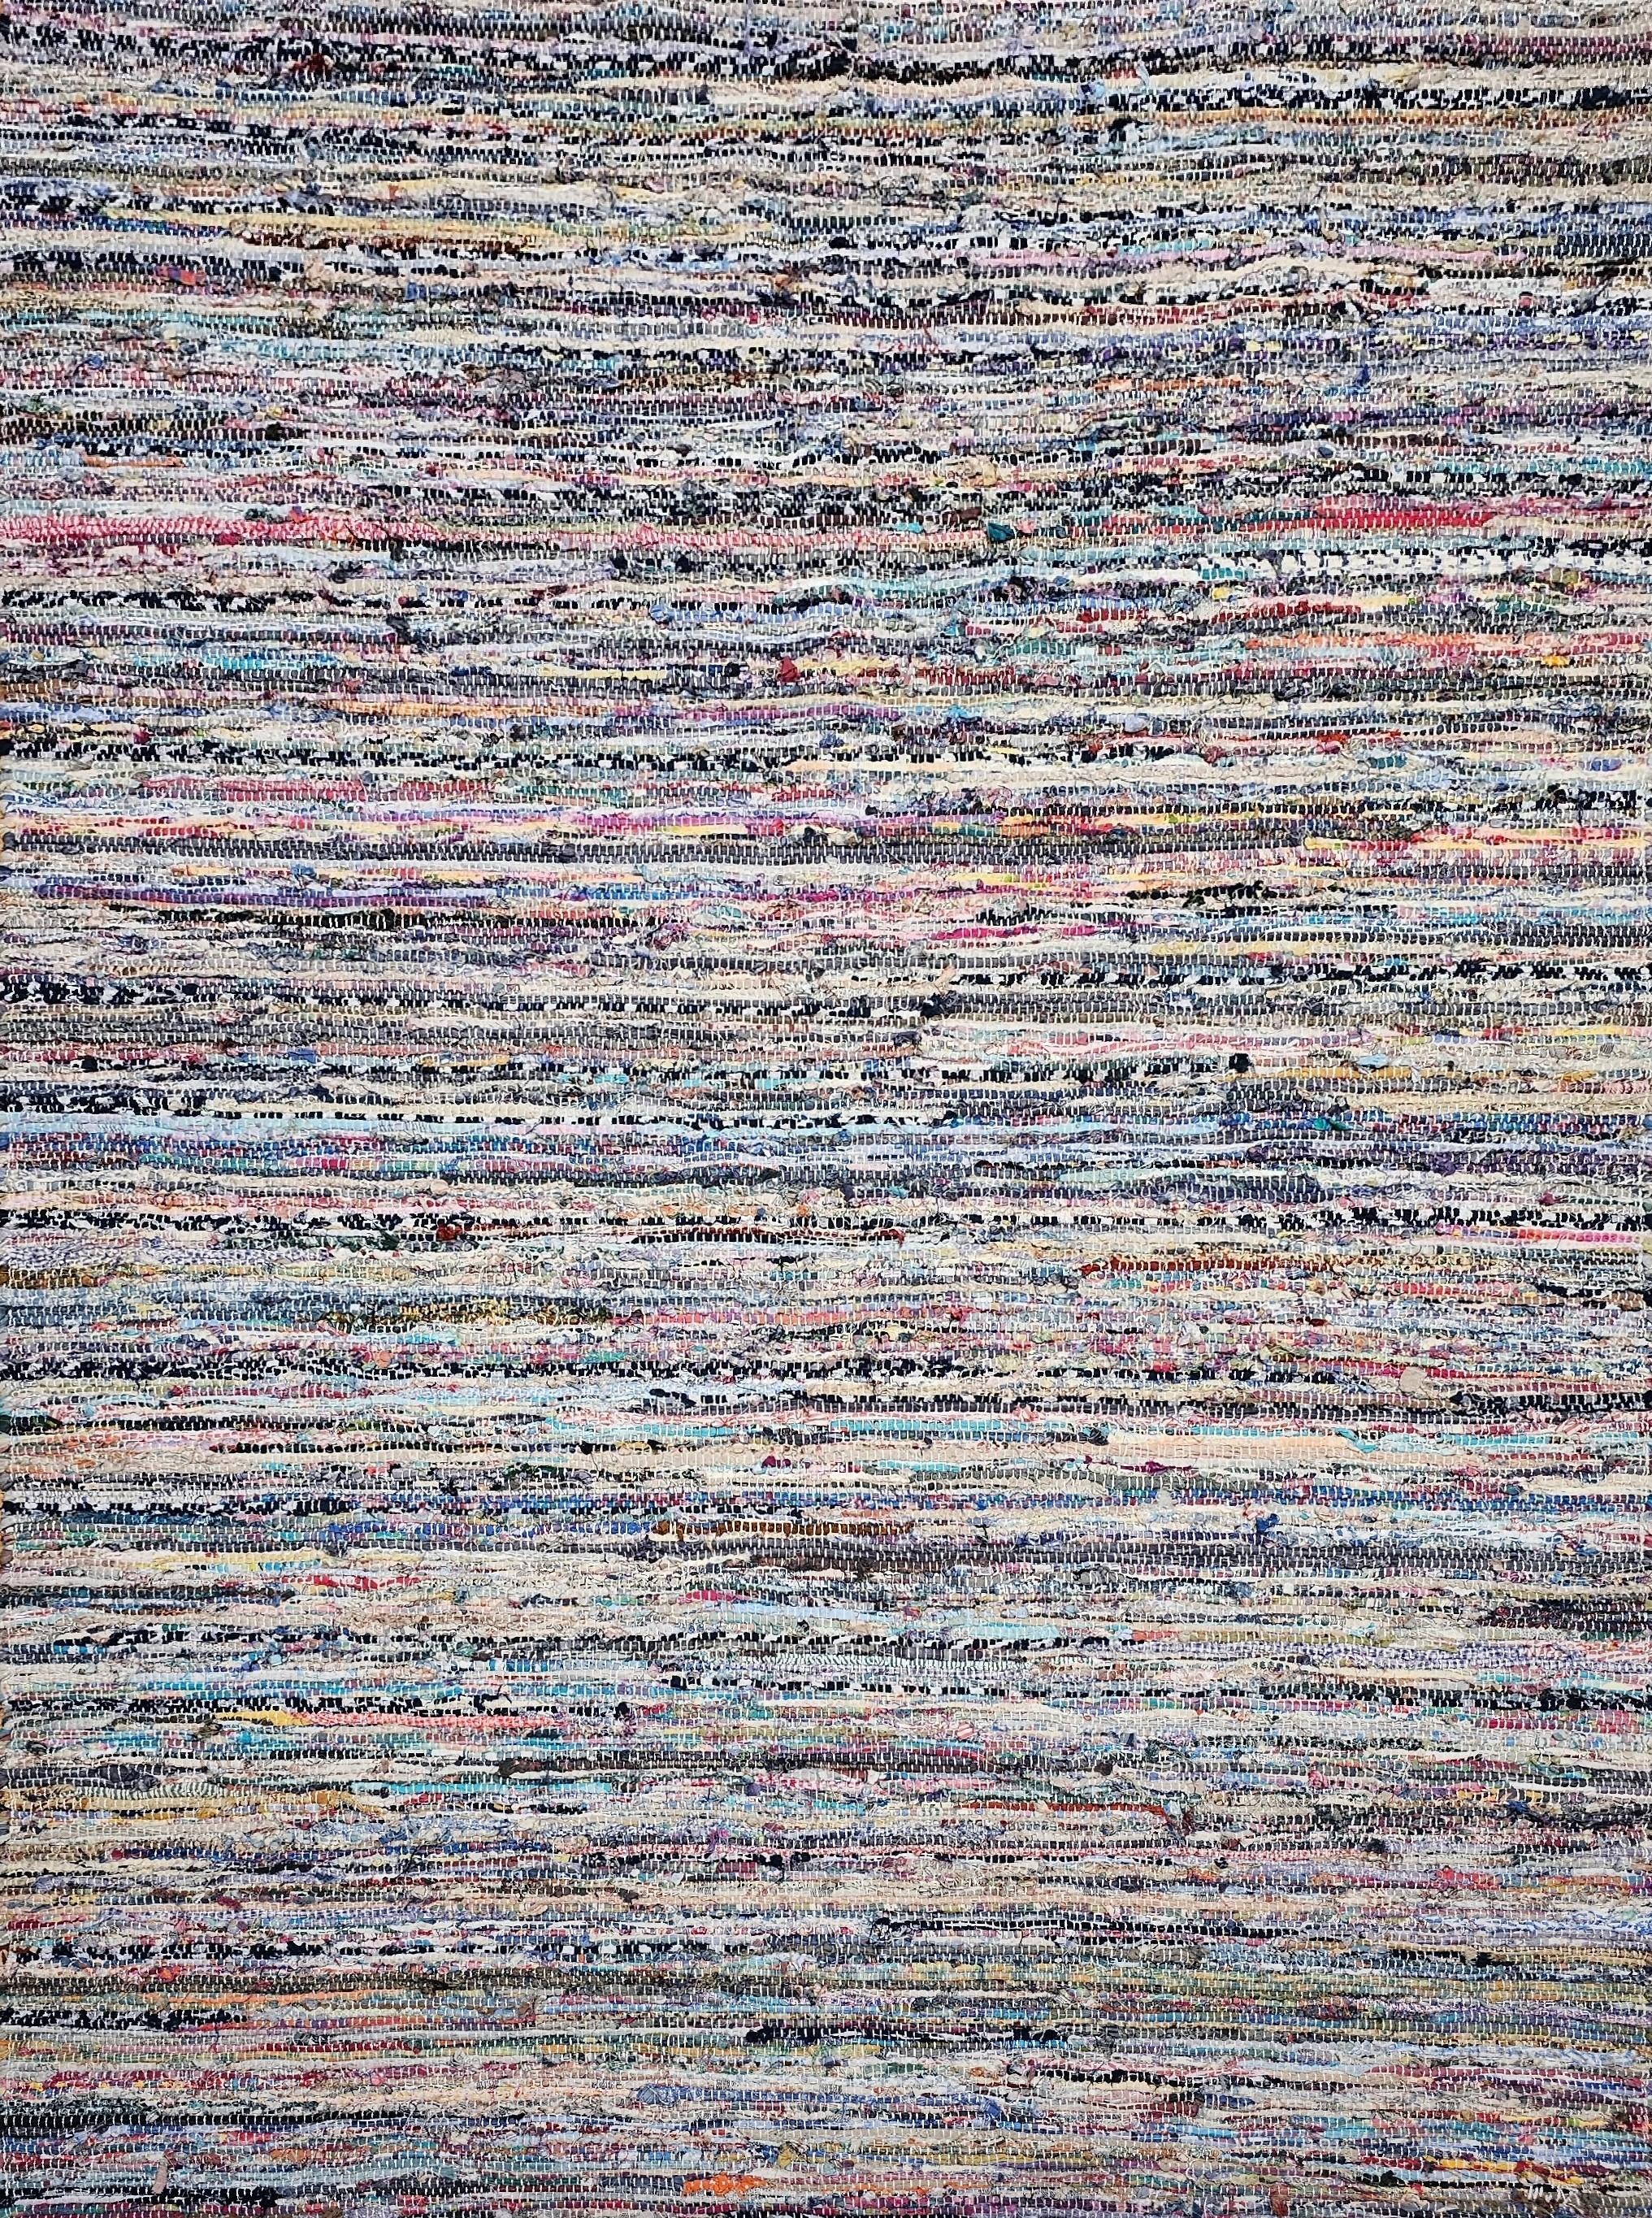 Hand-Woven Vintage American Rag Rug in Stripe Pattern in Blue, Yellow, Red, Pink, White For Sale